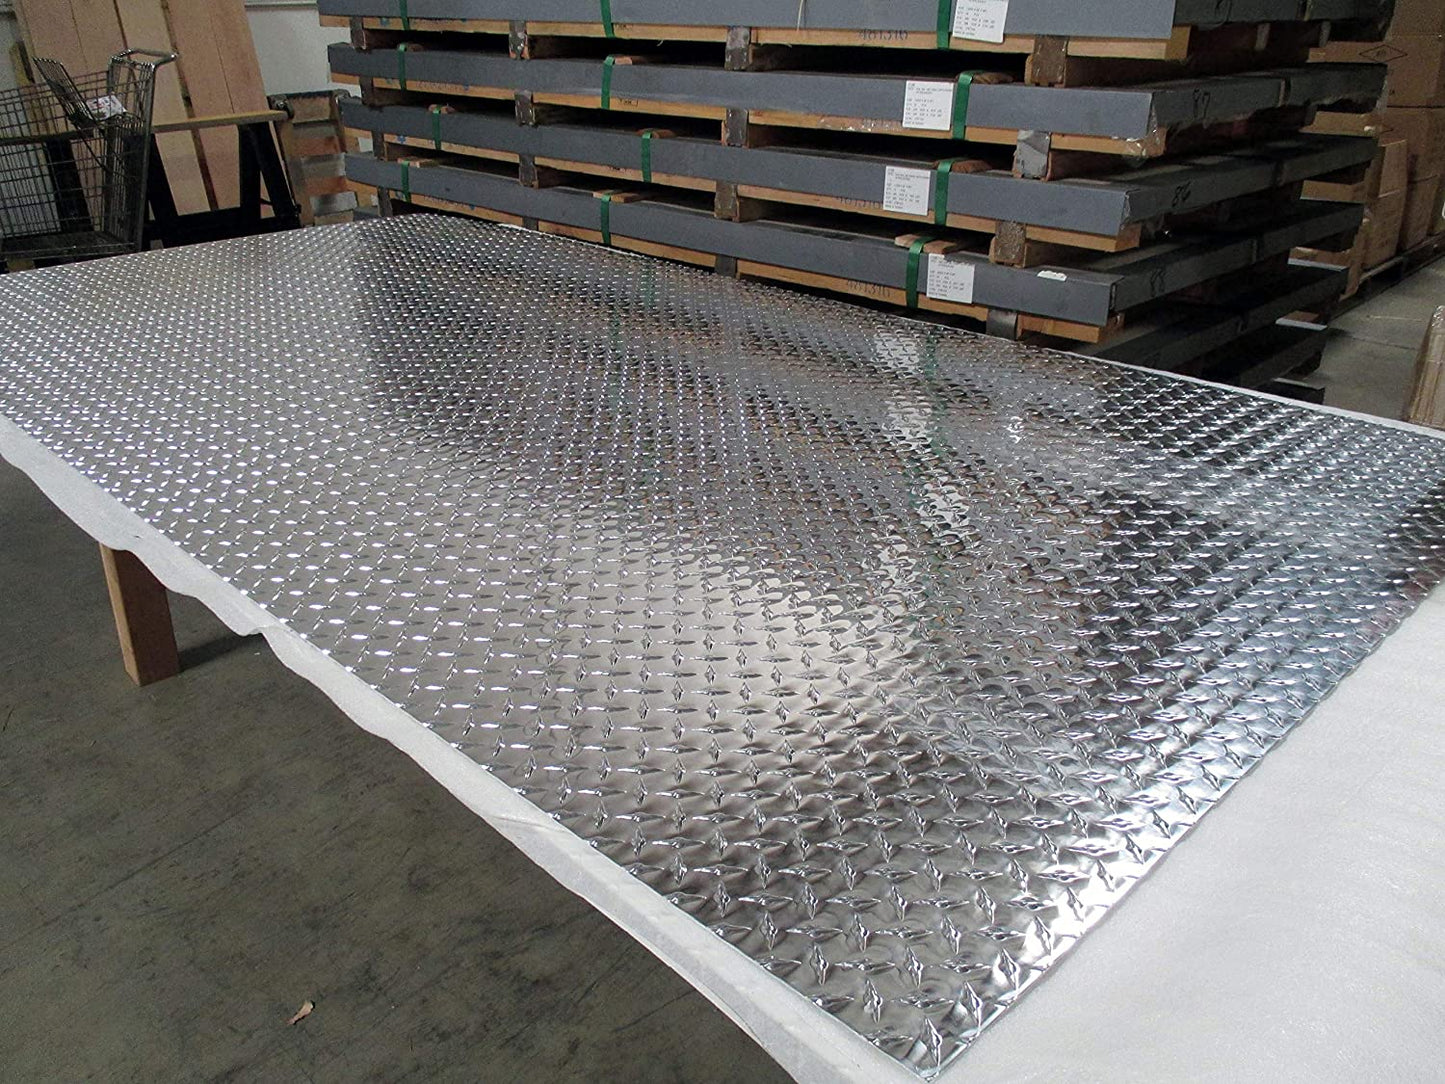 GALVANIZED DIAMOND PLATED 4X8 SHEET  DECKING FOR TRAILERS